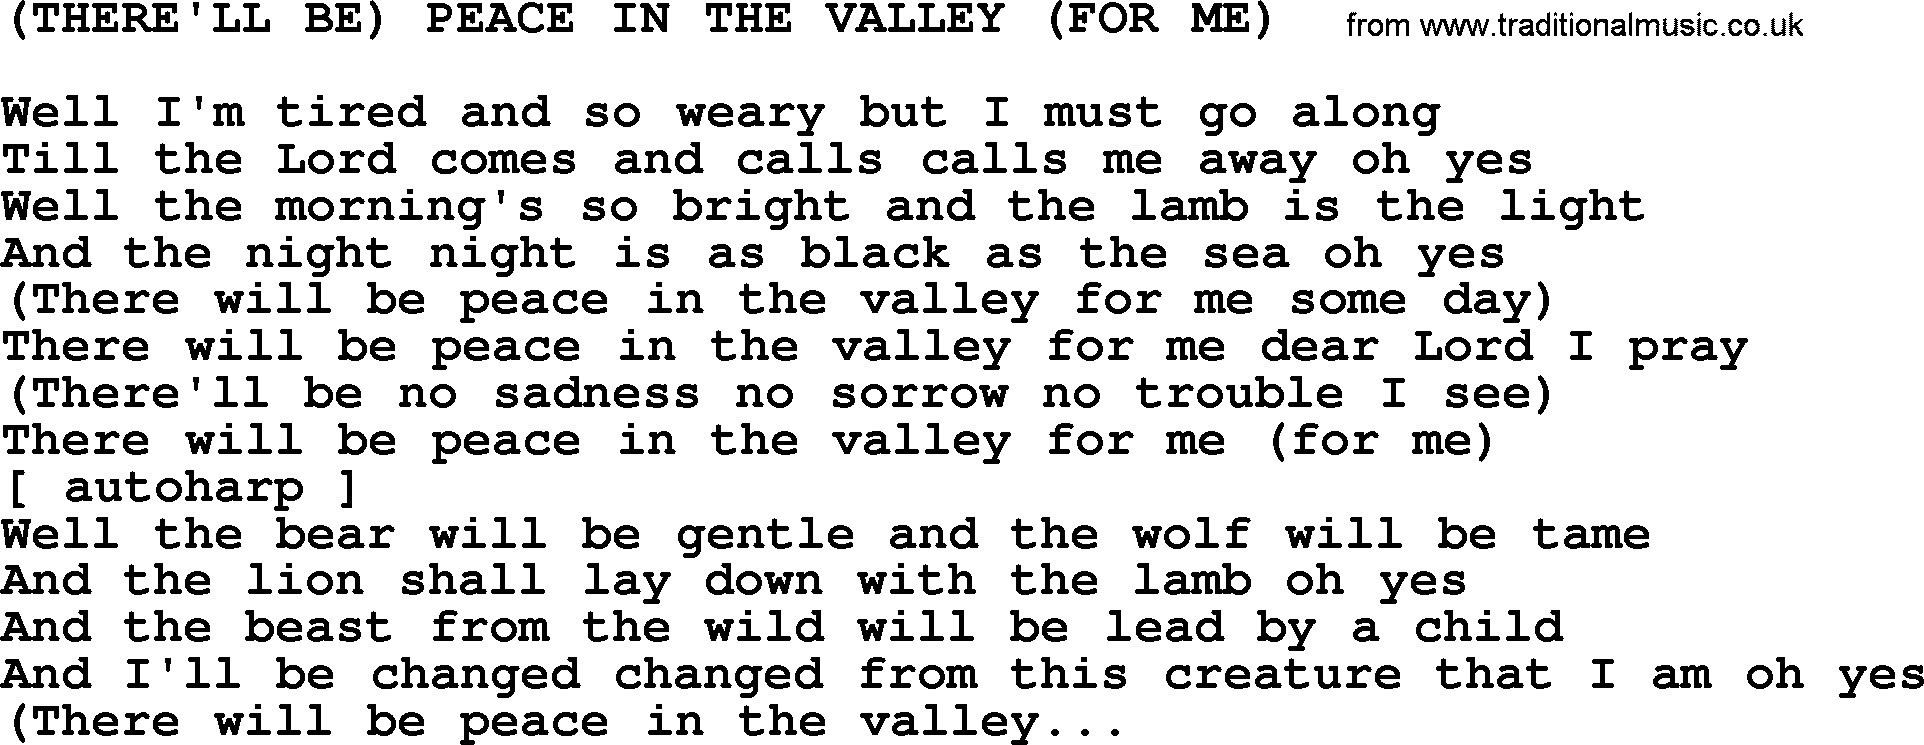 Johnny Cash song There'll Be Peace In The Valley For Me.txt lyrics